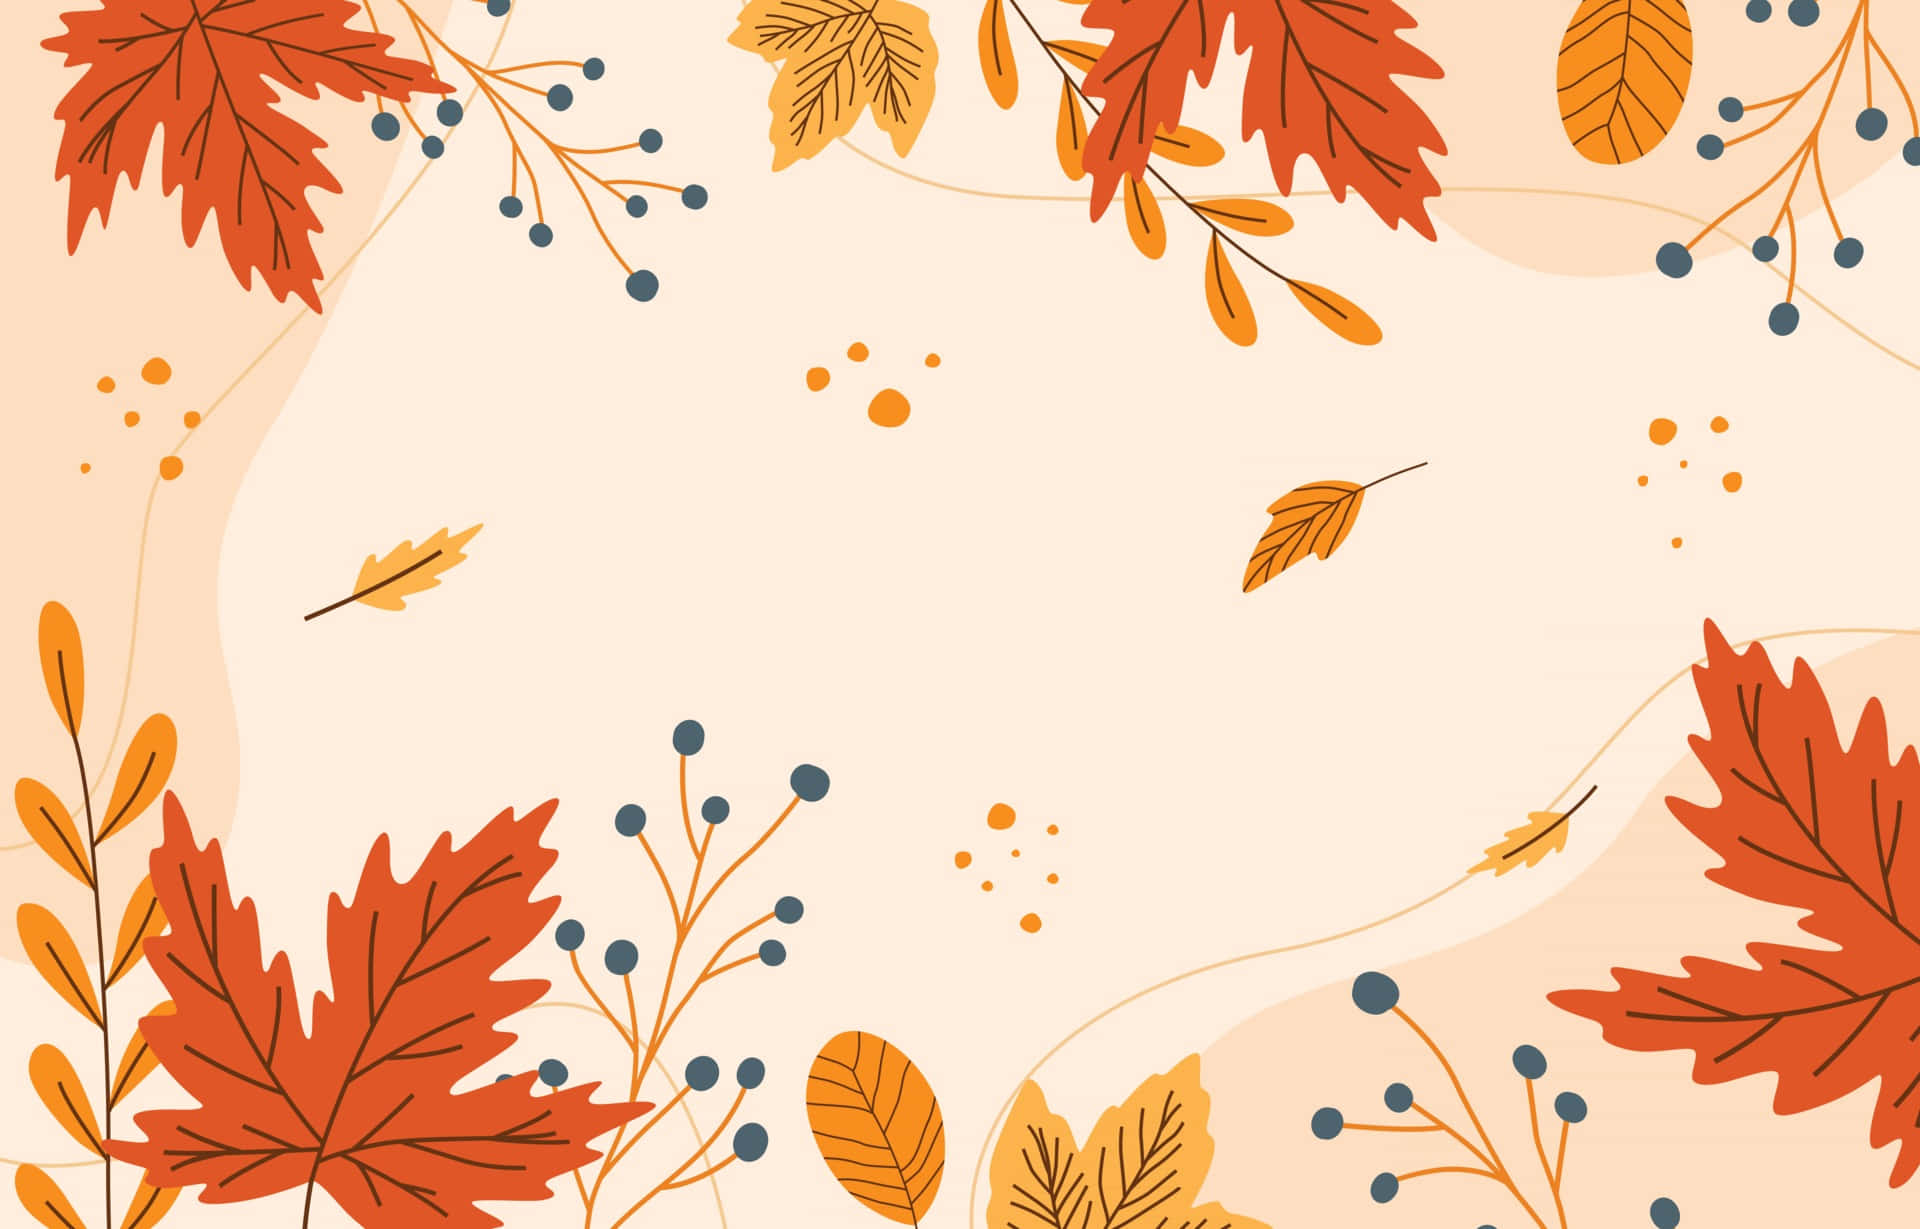 Autumn Leaves Background With A Border